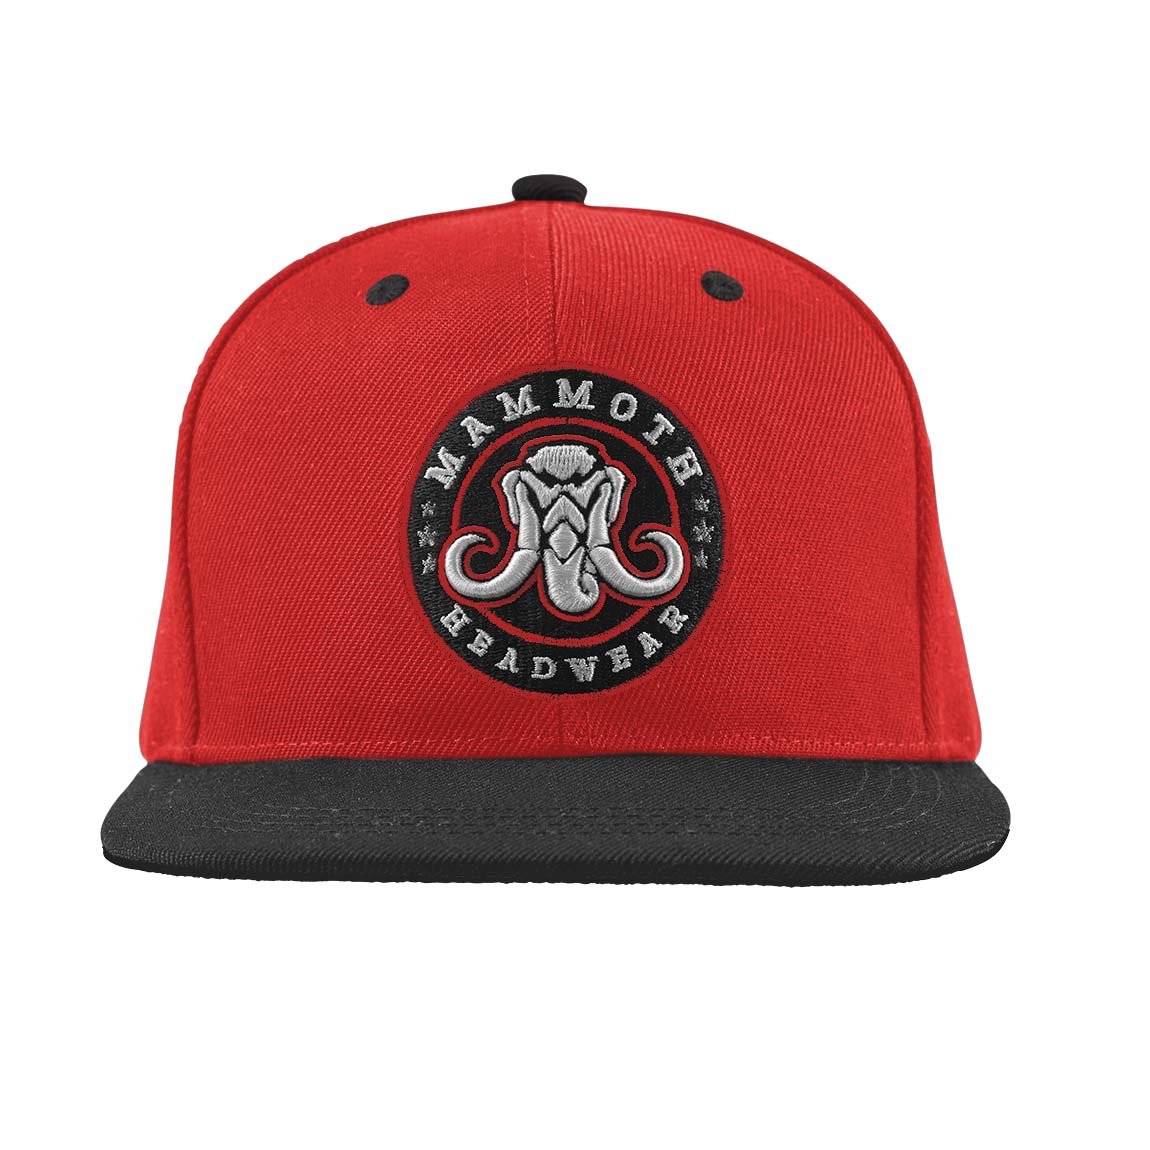 Mammoth Headwear's snapback and trucker hat collection